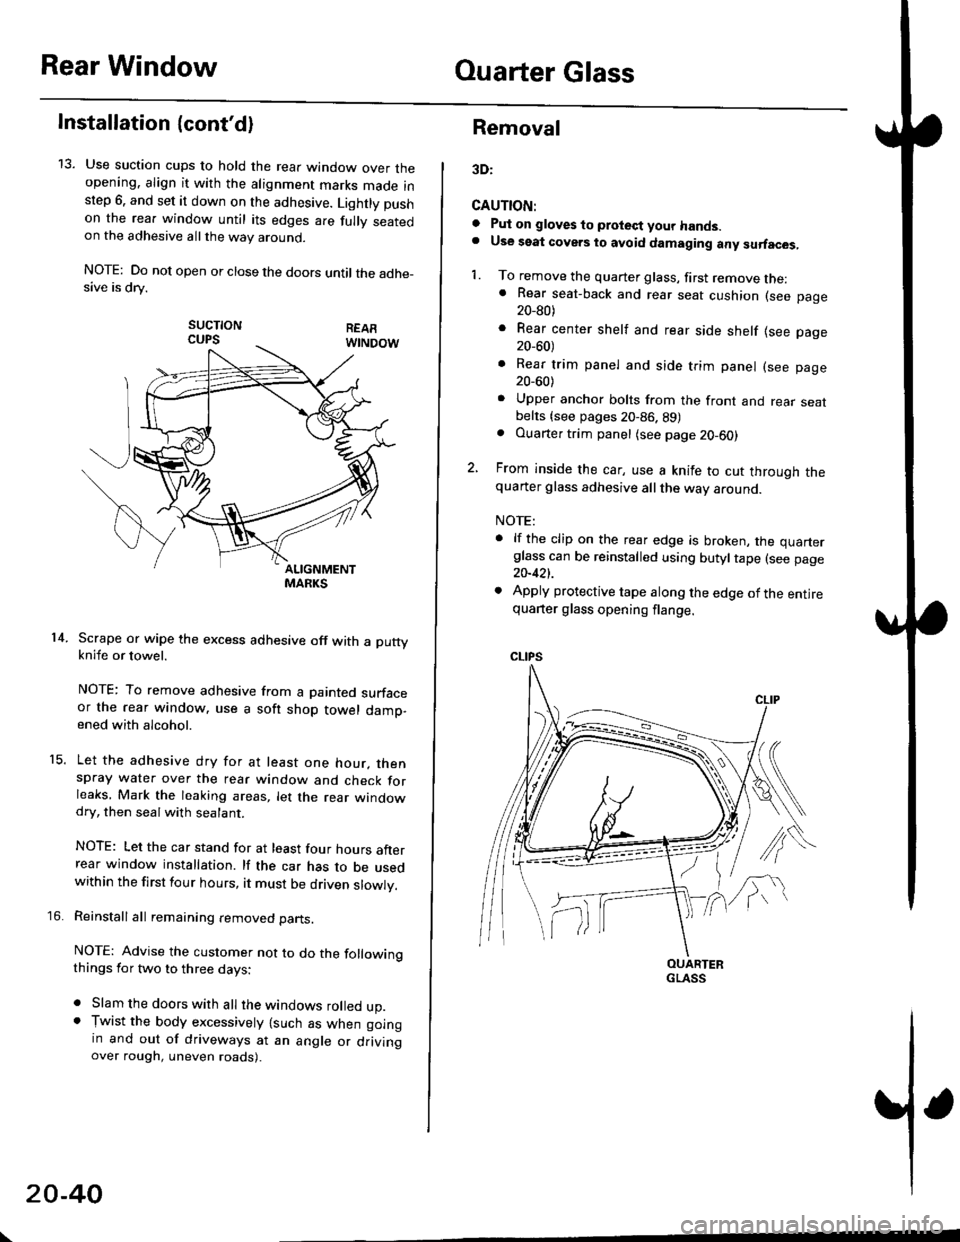 HONDA CIVIC 1997 6.G Workshop Manual Rear WindowOuarter Glass
Installation {contd)
13. Use suction cups to hold the rear window over theopening. align it with the alignment marks made inslep 6. and set it down on the adhesive. Lightly p